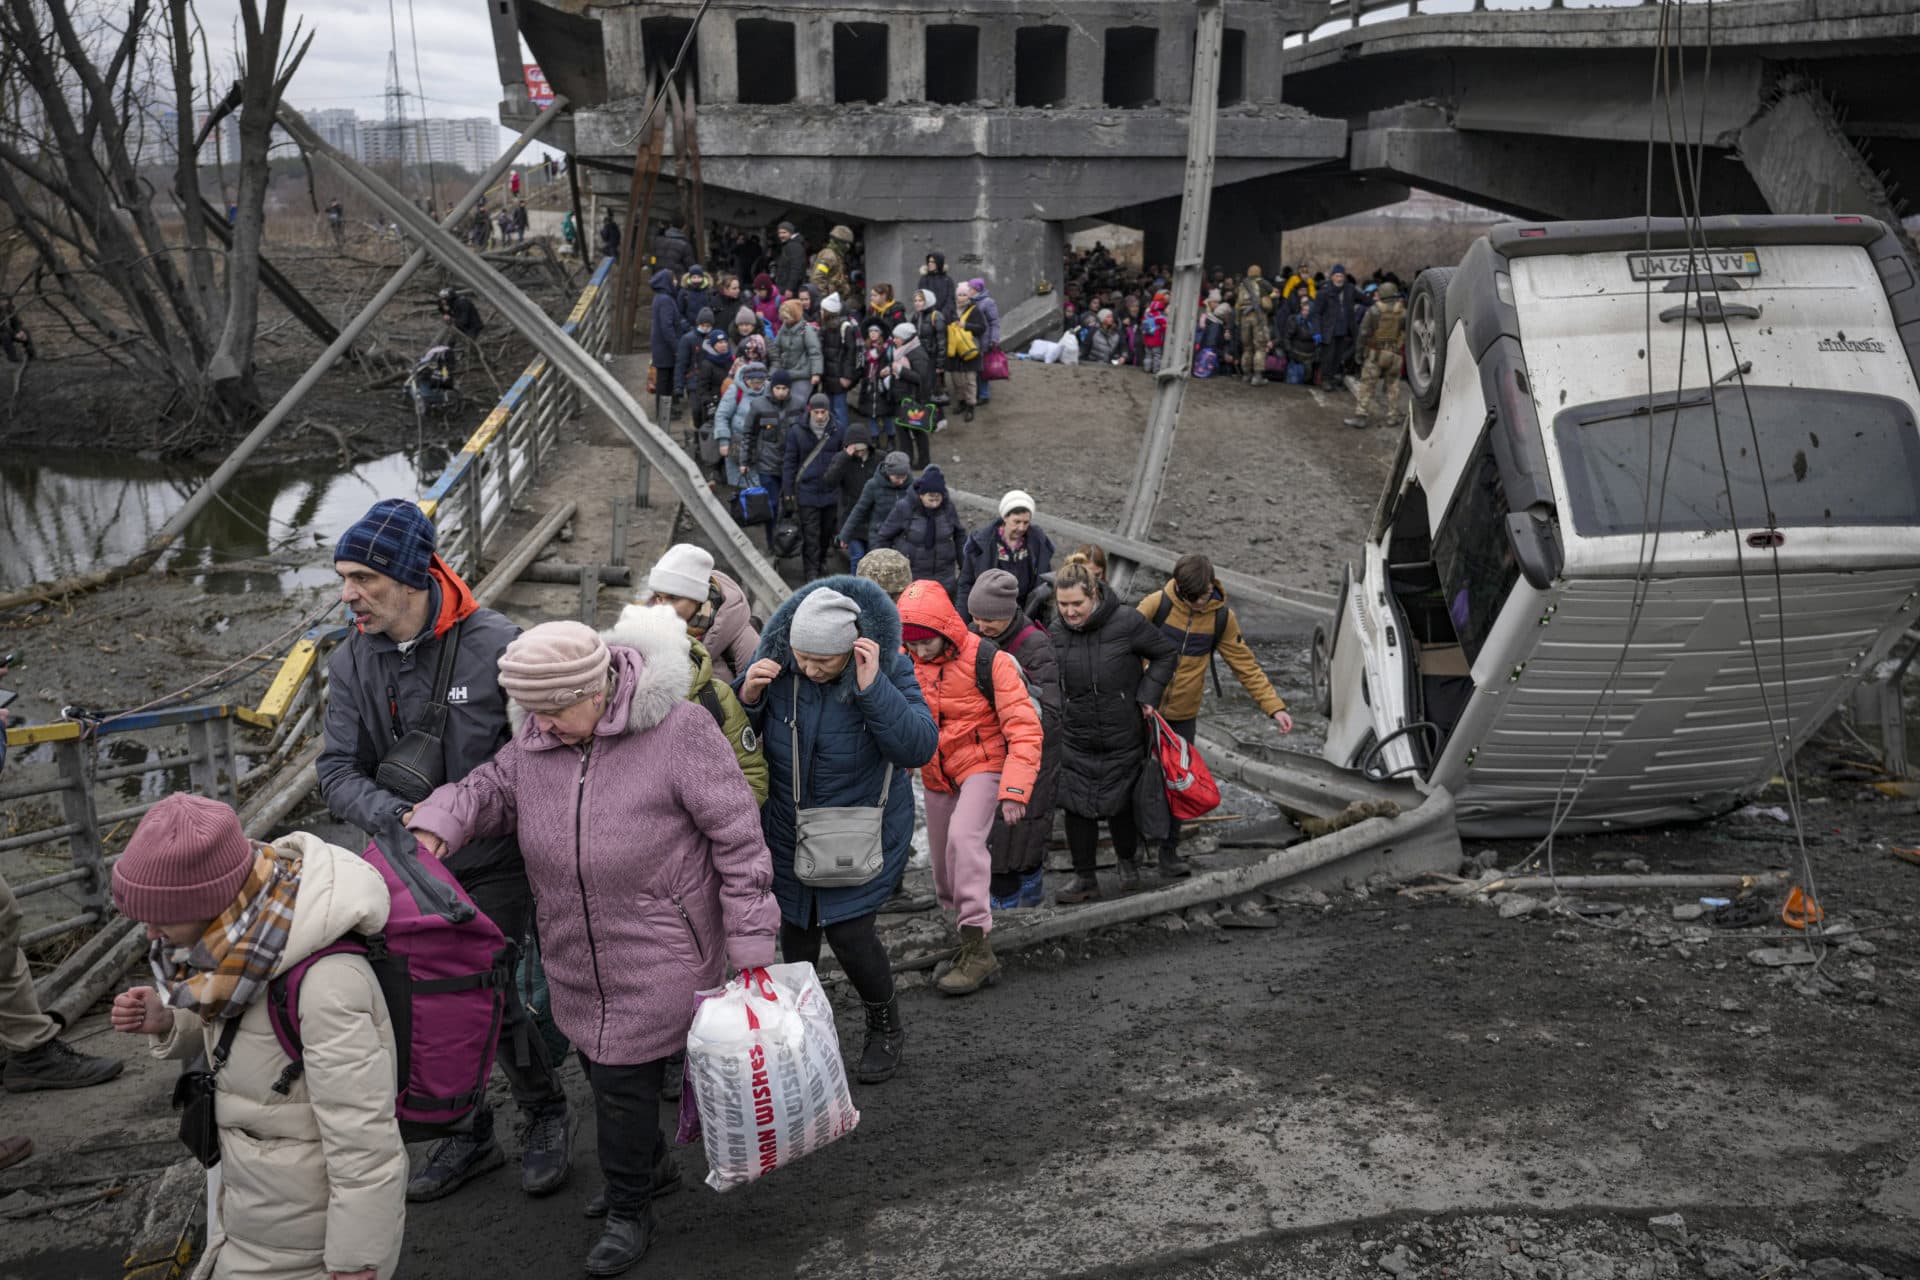 People cross on an improvised path under a bridge that was destroyed by a Russian airstrike, while fleeing the town of Irpin on Saturday. (Vadim Ghirda/AP)